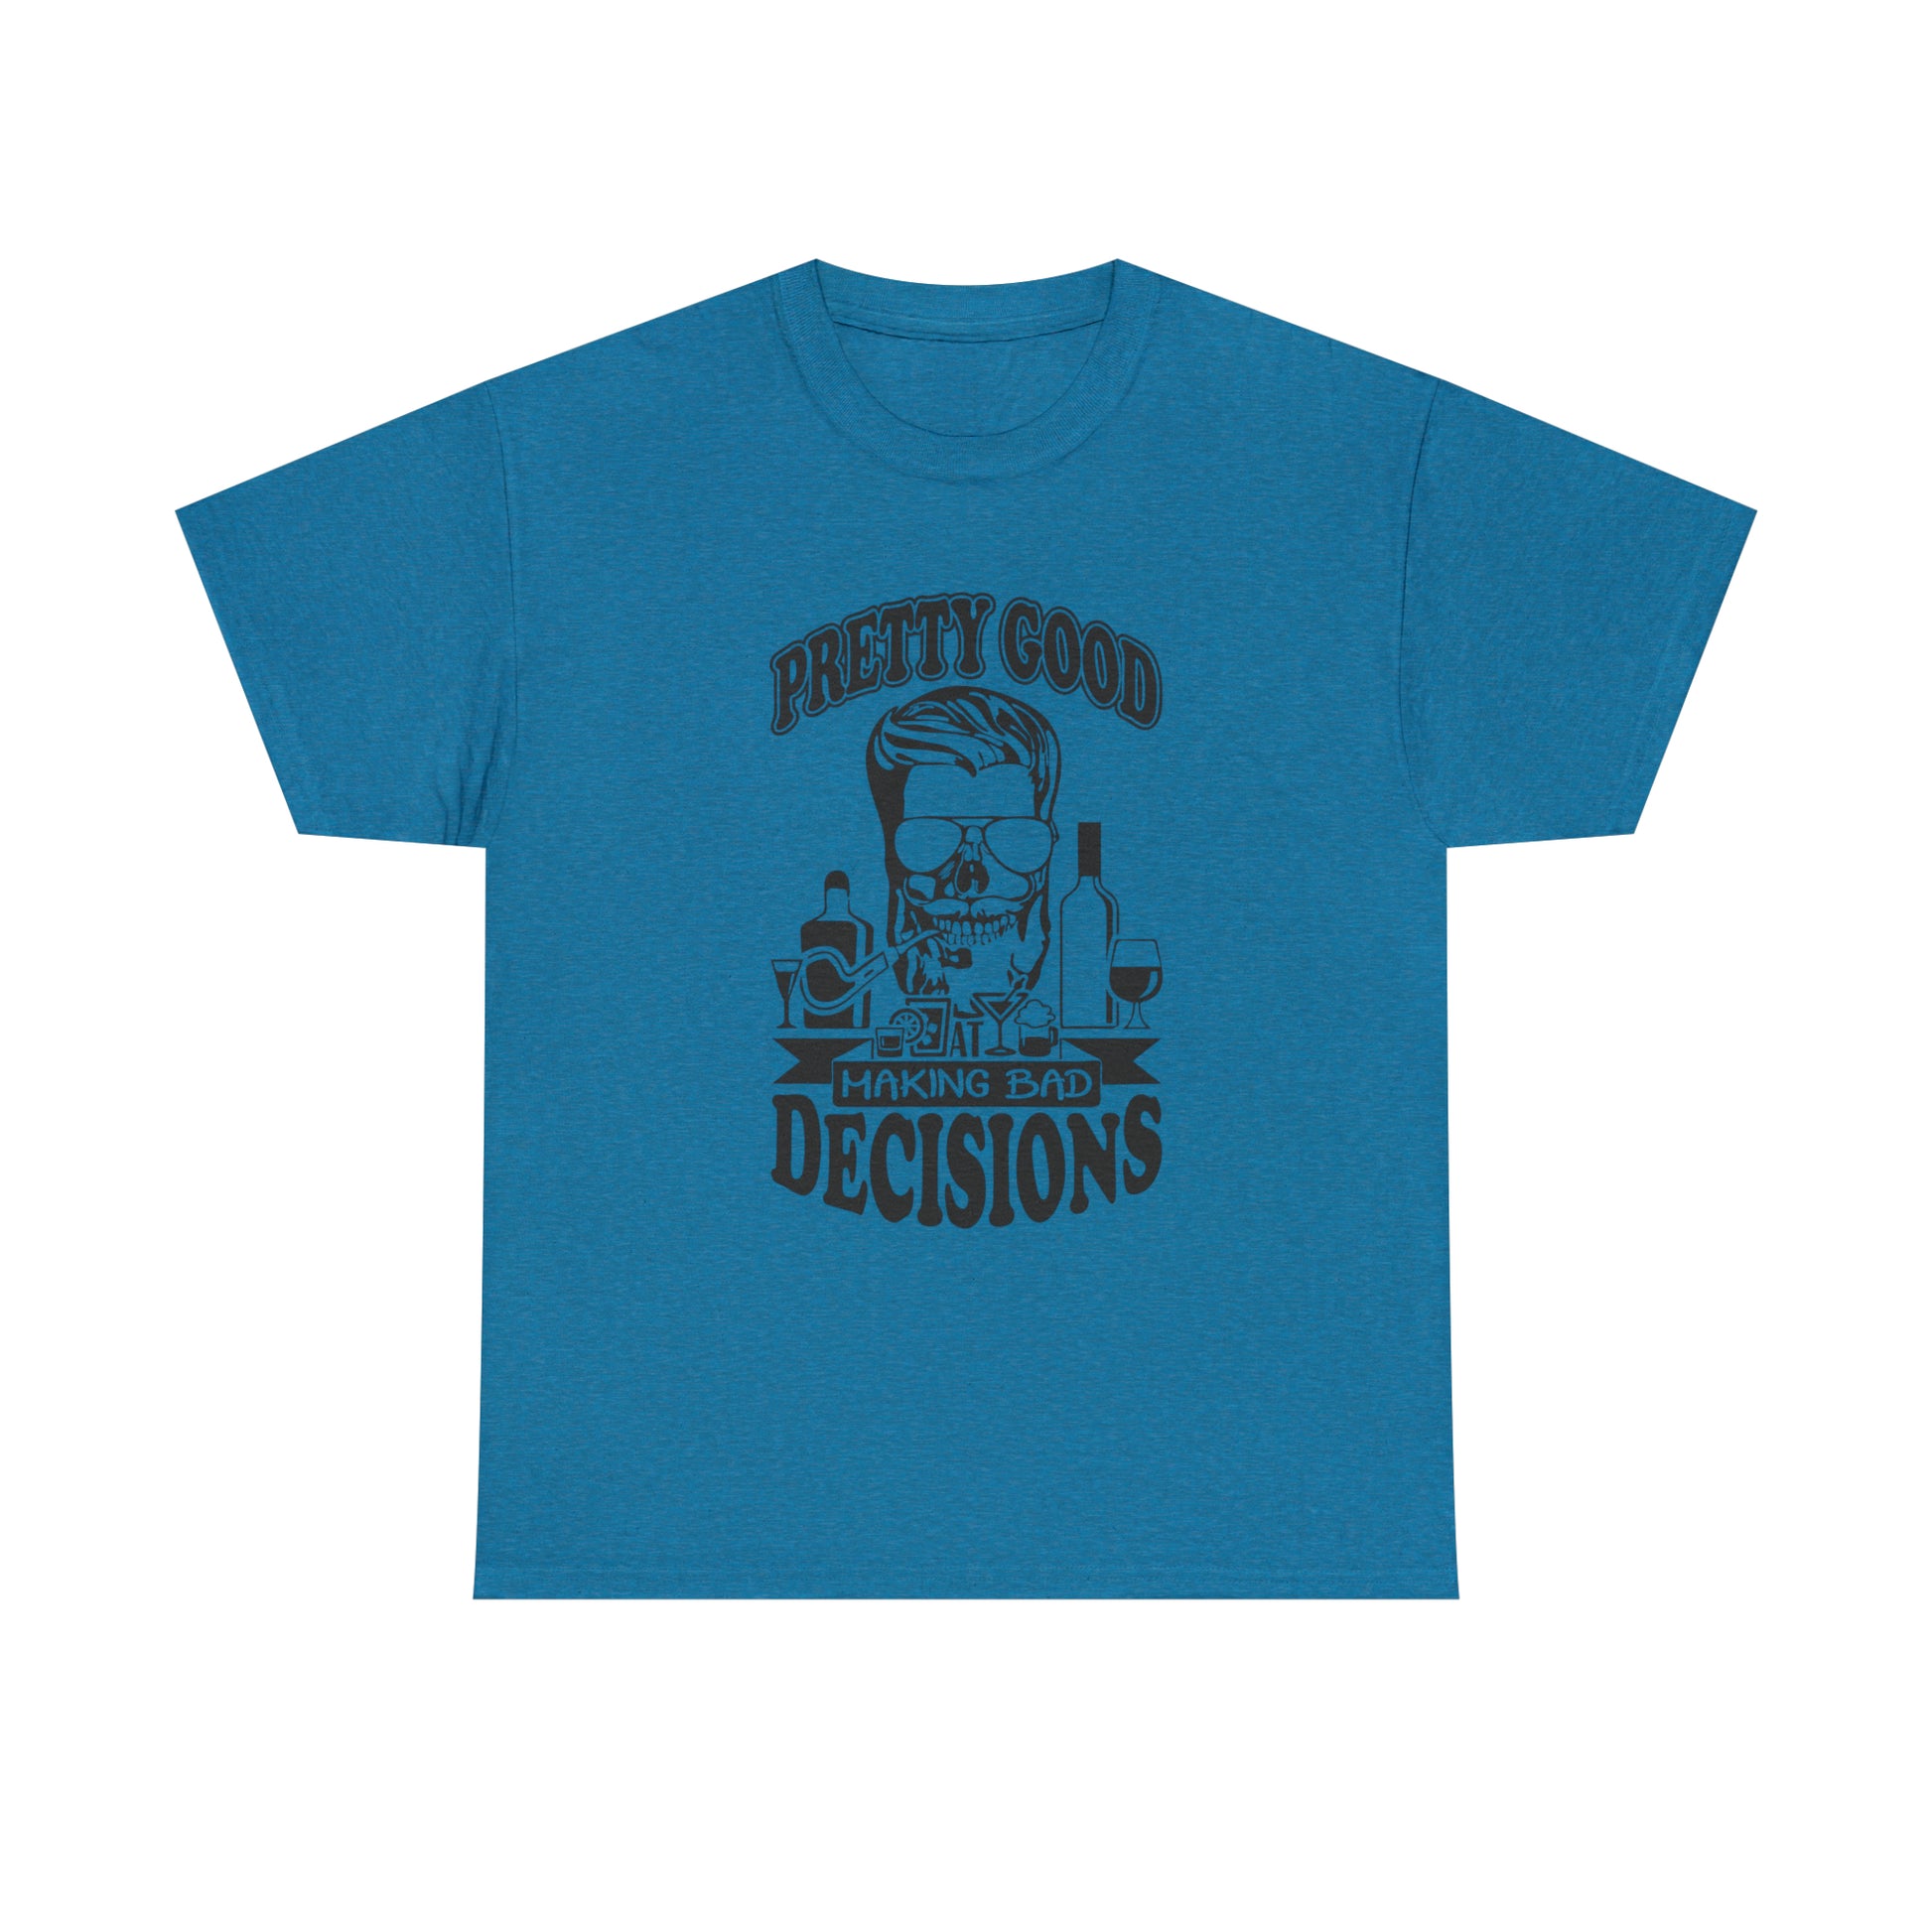 "Pretty Good At Making Bad Decisions" T-Shirt - Weave Got Gifts - Unique Gifts You Won’t Find Anywhere Else!